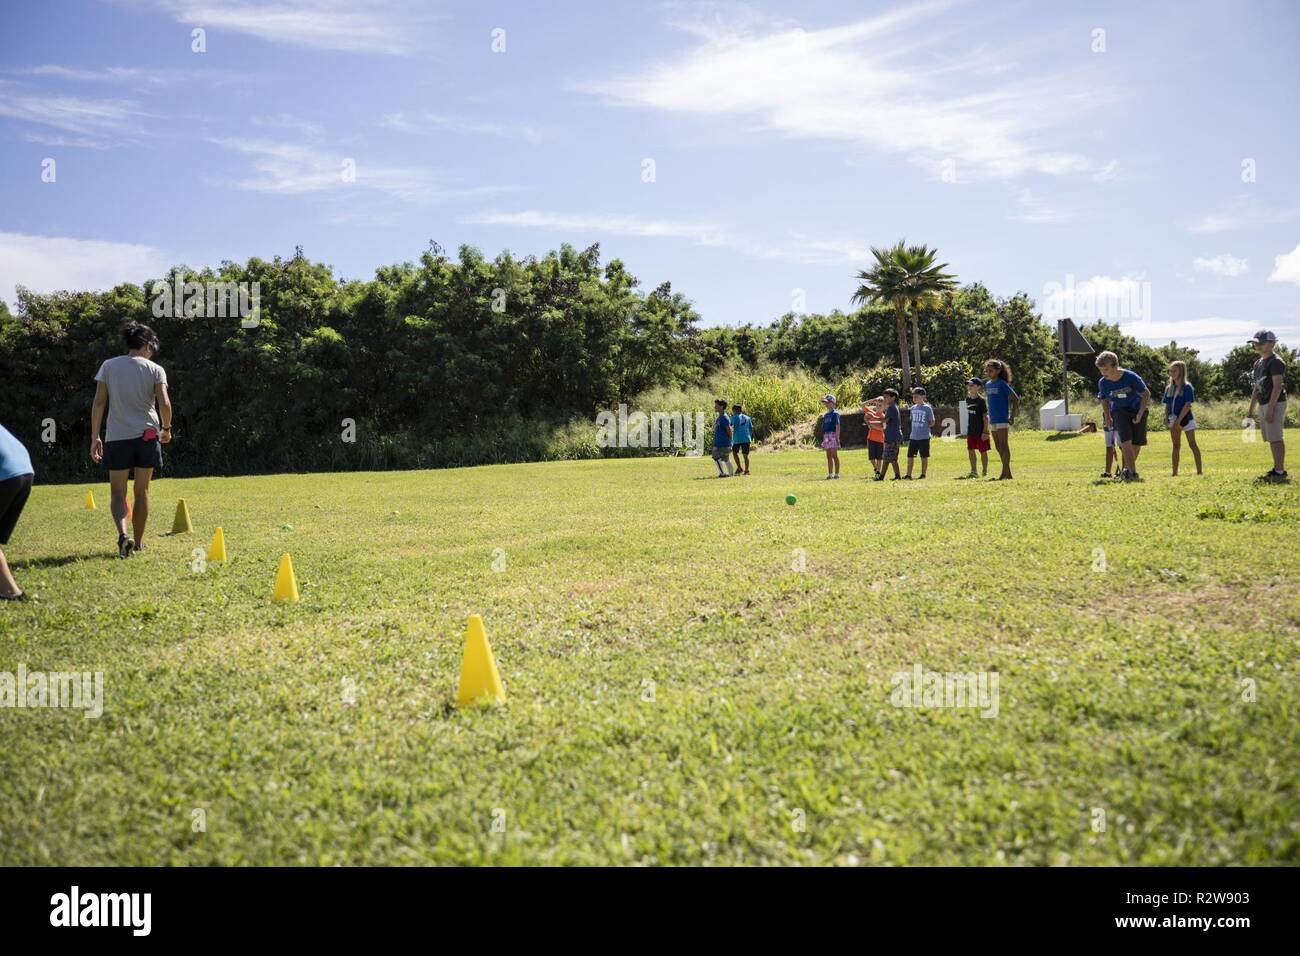 Students with Mokapu Elementary School play a traditional Hawaiian game at the Nu’ Upia Ponds during a field trip, Marine Corps Base Hawaii, Nov. 14, 2018. The base’s Environmental Department partnered with the school to host a cultural learning field trip to teach students the significance of the ponds and the Hawaiian culture. Stock Photo